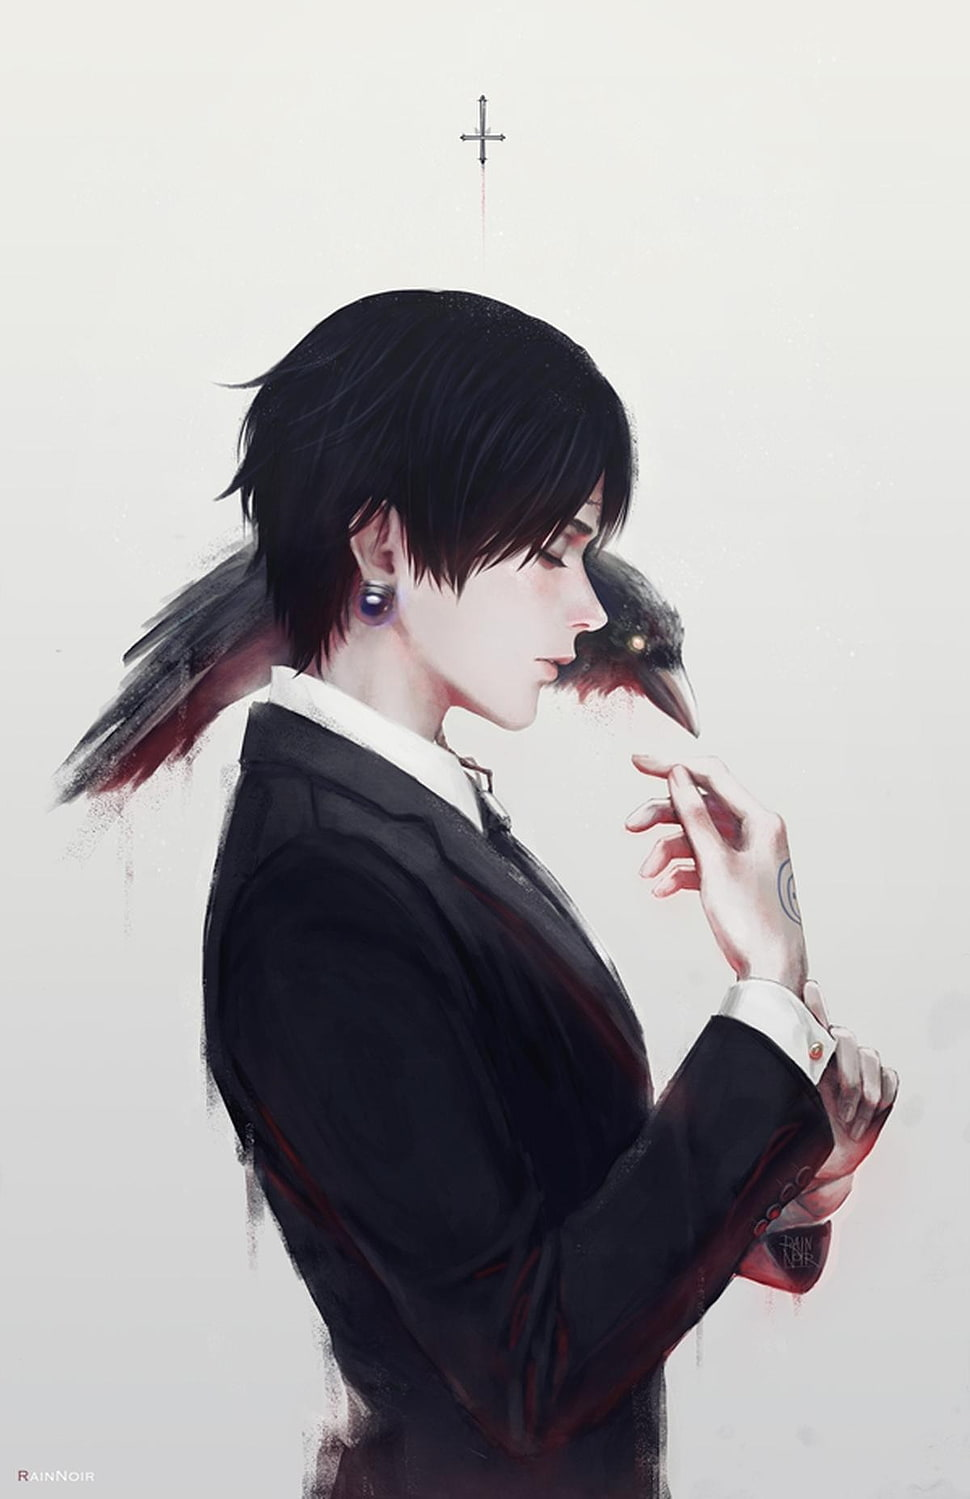 Handsome Suit and Tie Sano by NWAwalrus on DeviantArt